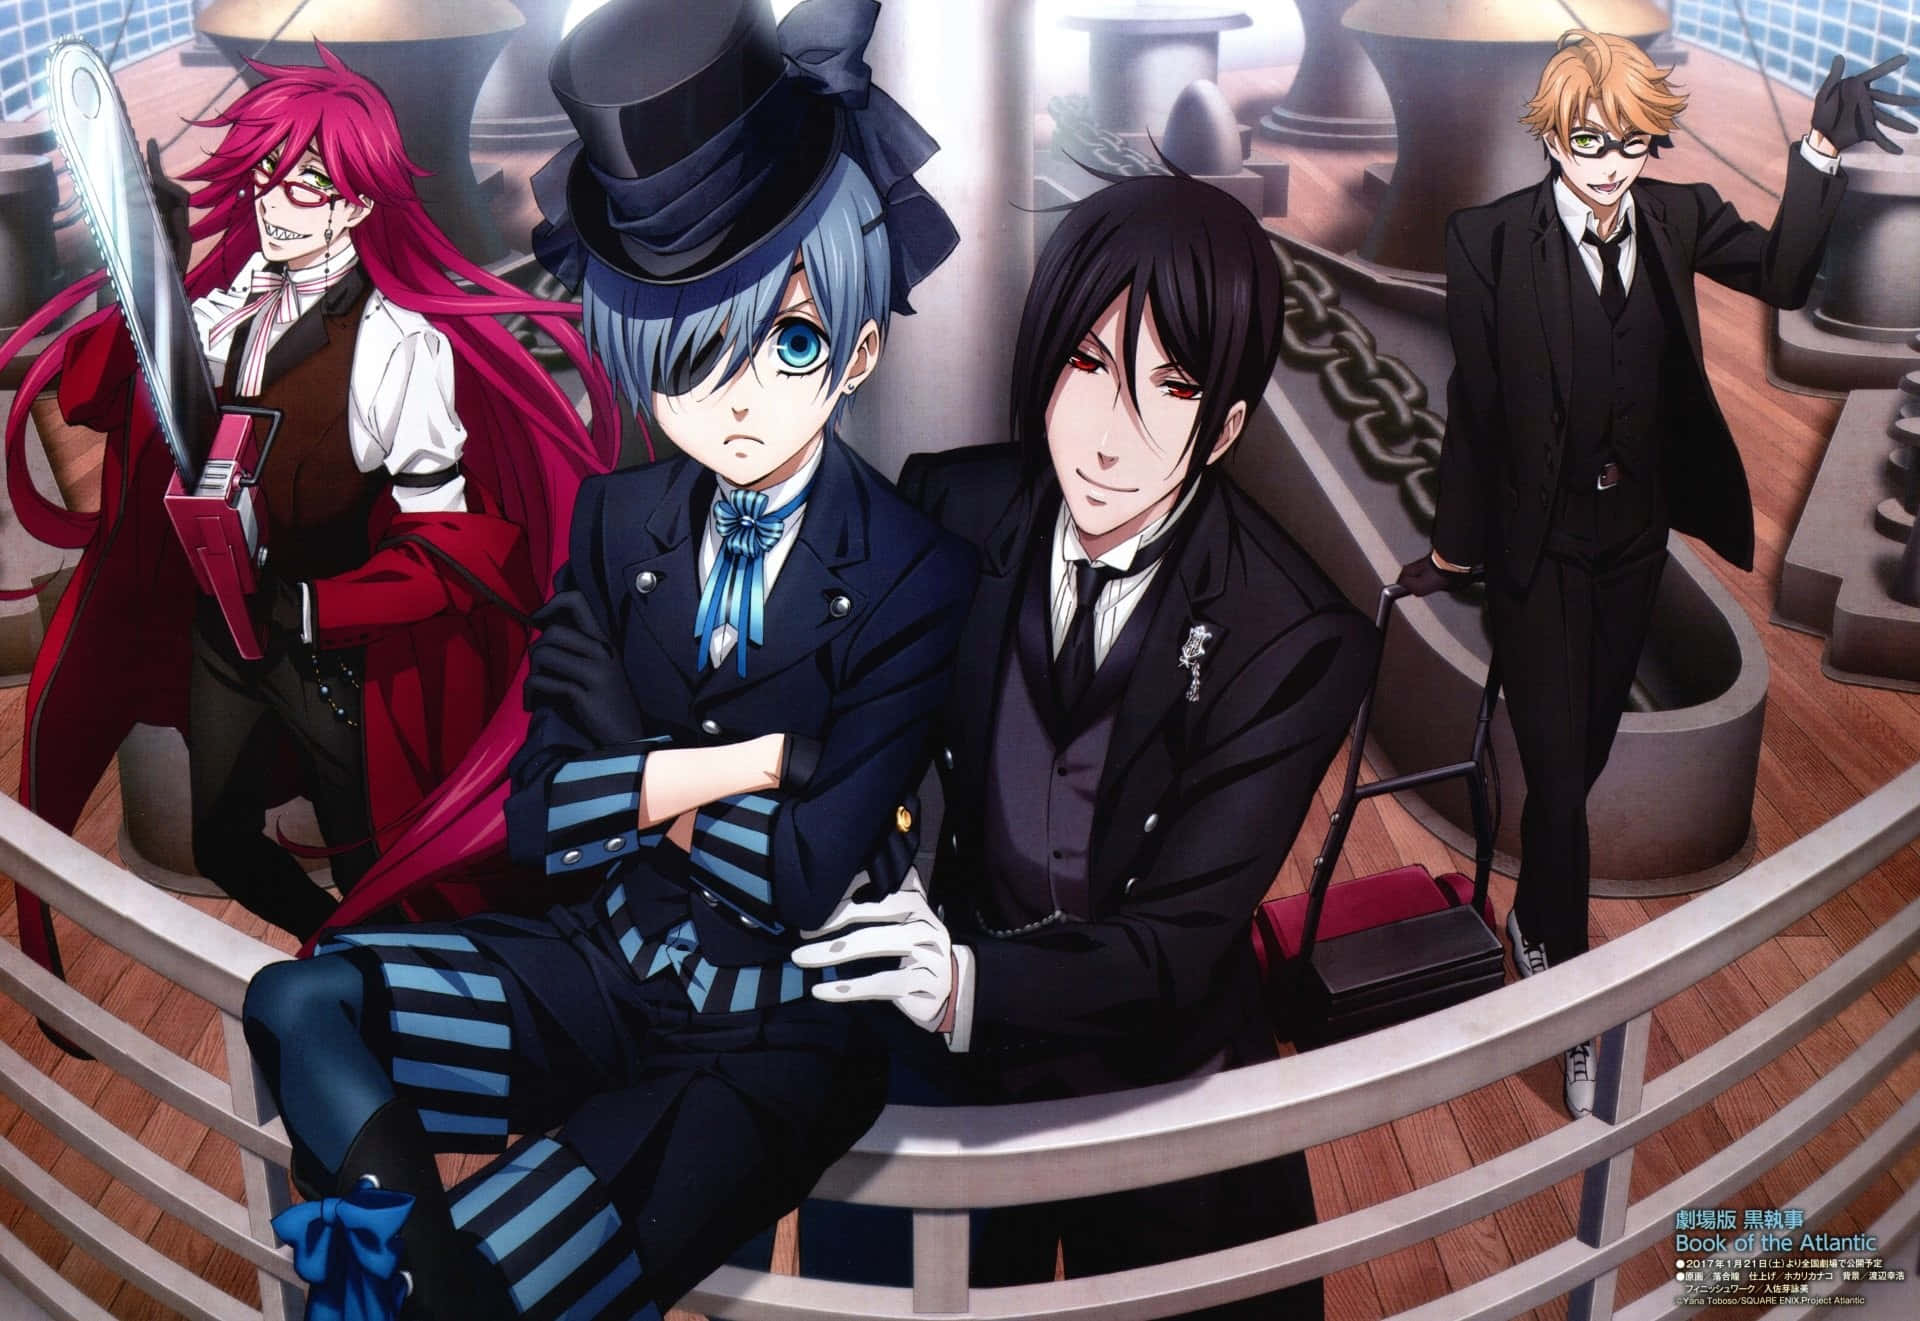 Enter the world of Black Butler - where demons and detectives mix